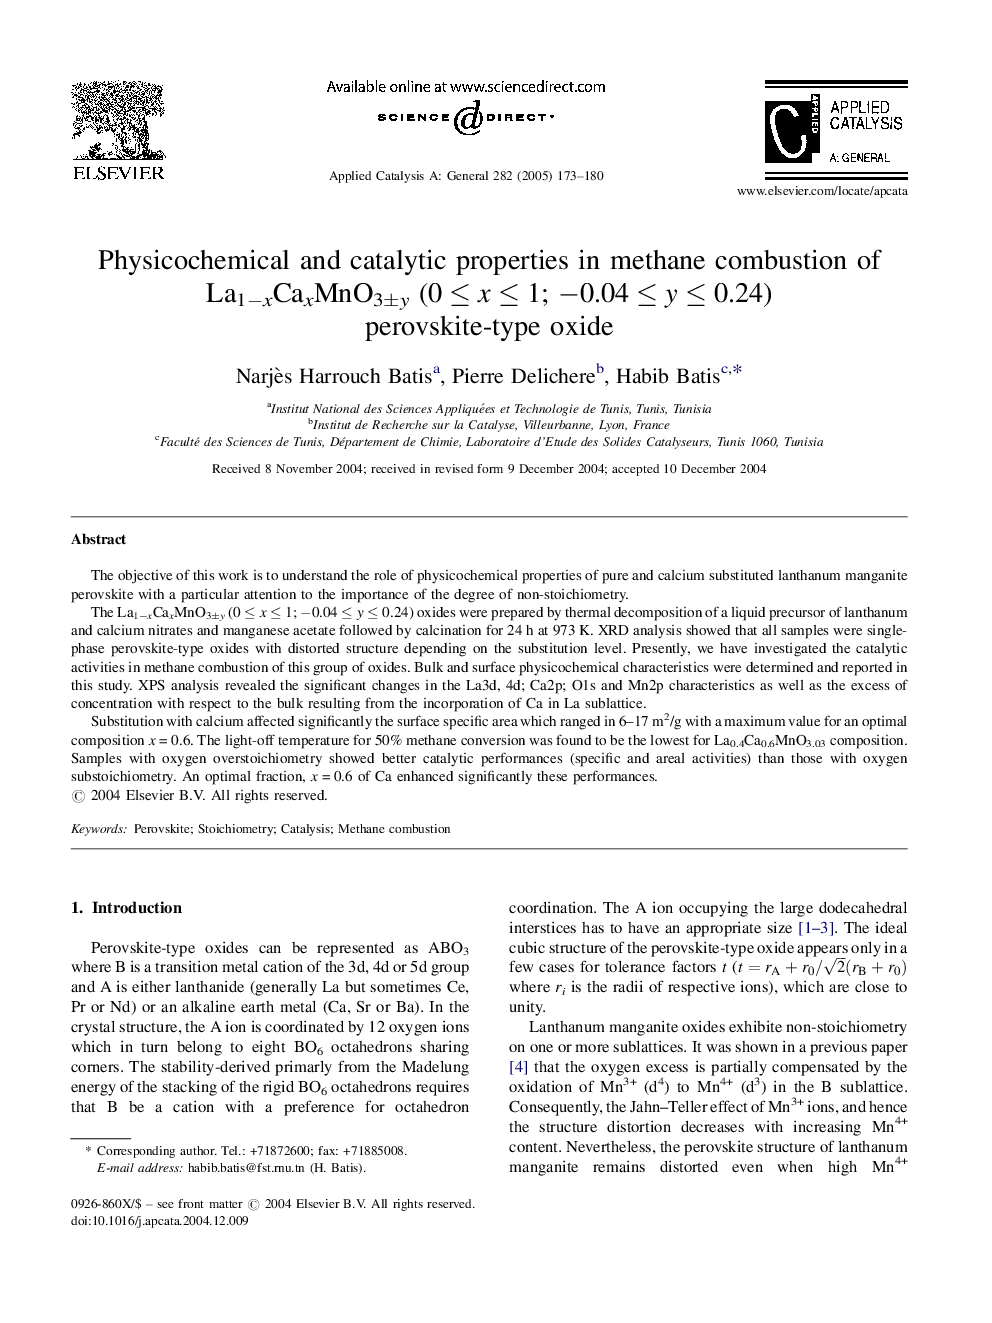 Physicochemical and catalytic properties in methane combustion of La1âxCaxMnO3Â±y (0Â â¤Â xÂ â¤Â 1; â0.04Â â¤Â yÂ â¤Â 0.24) perovskite-type oxide